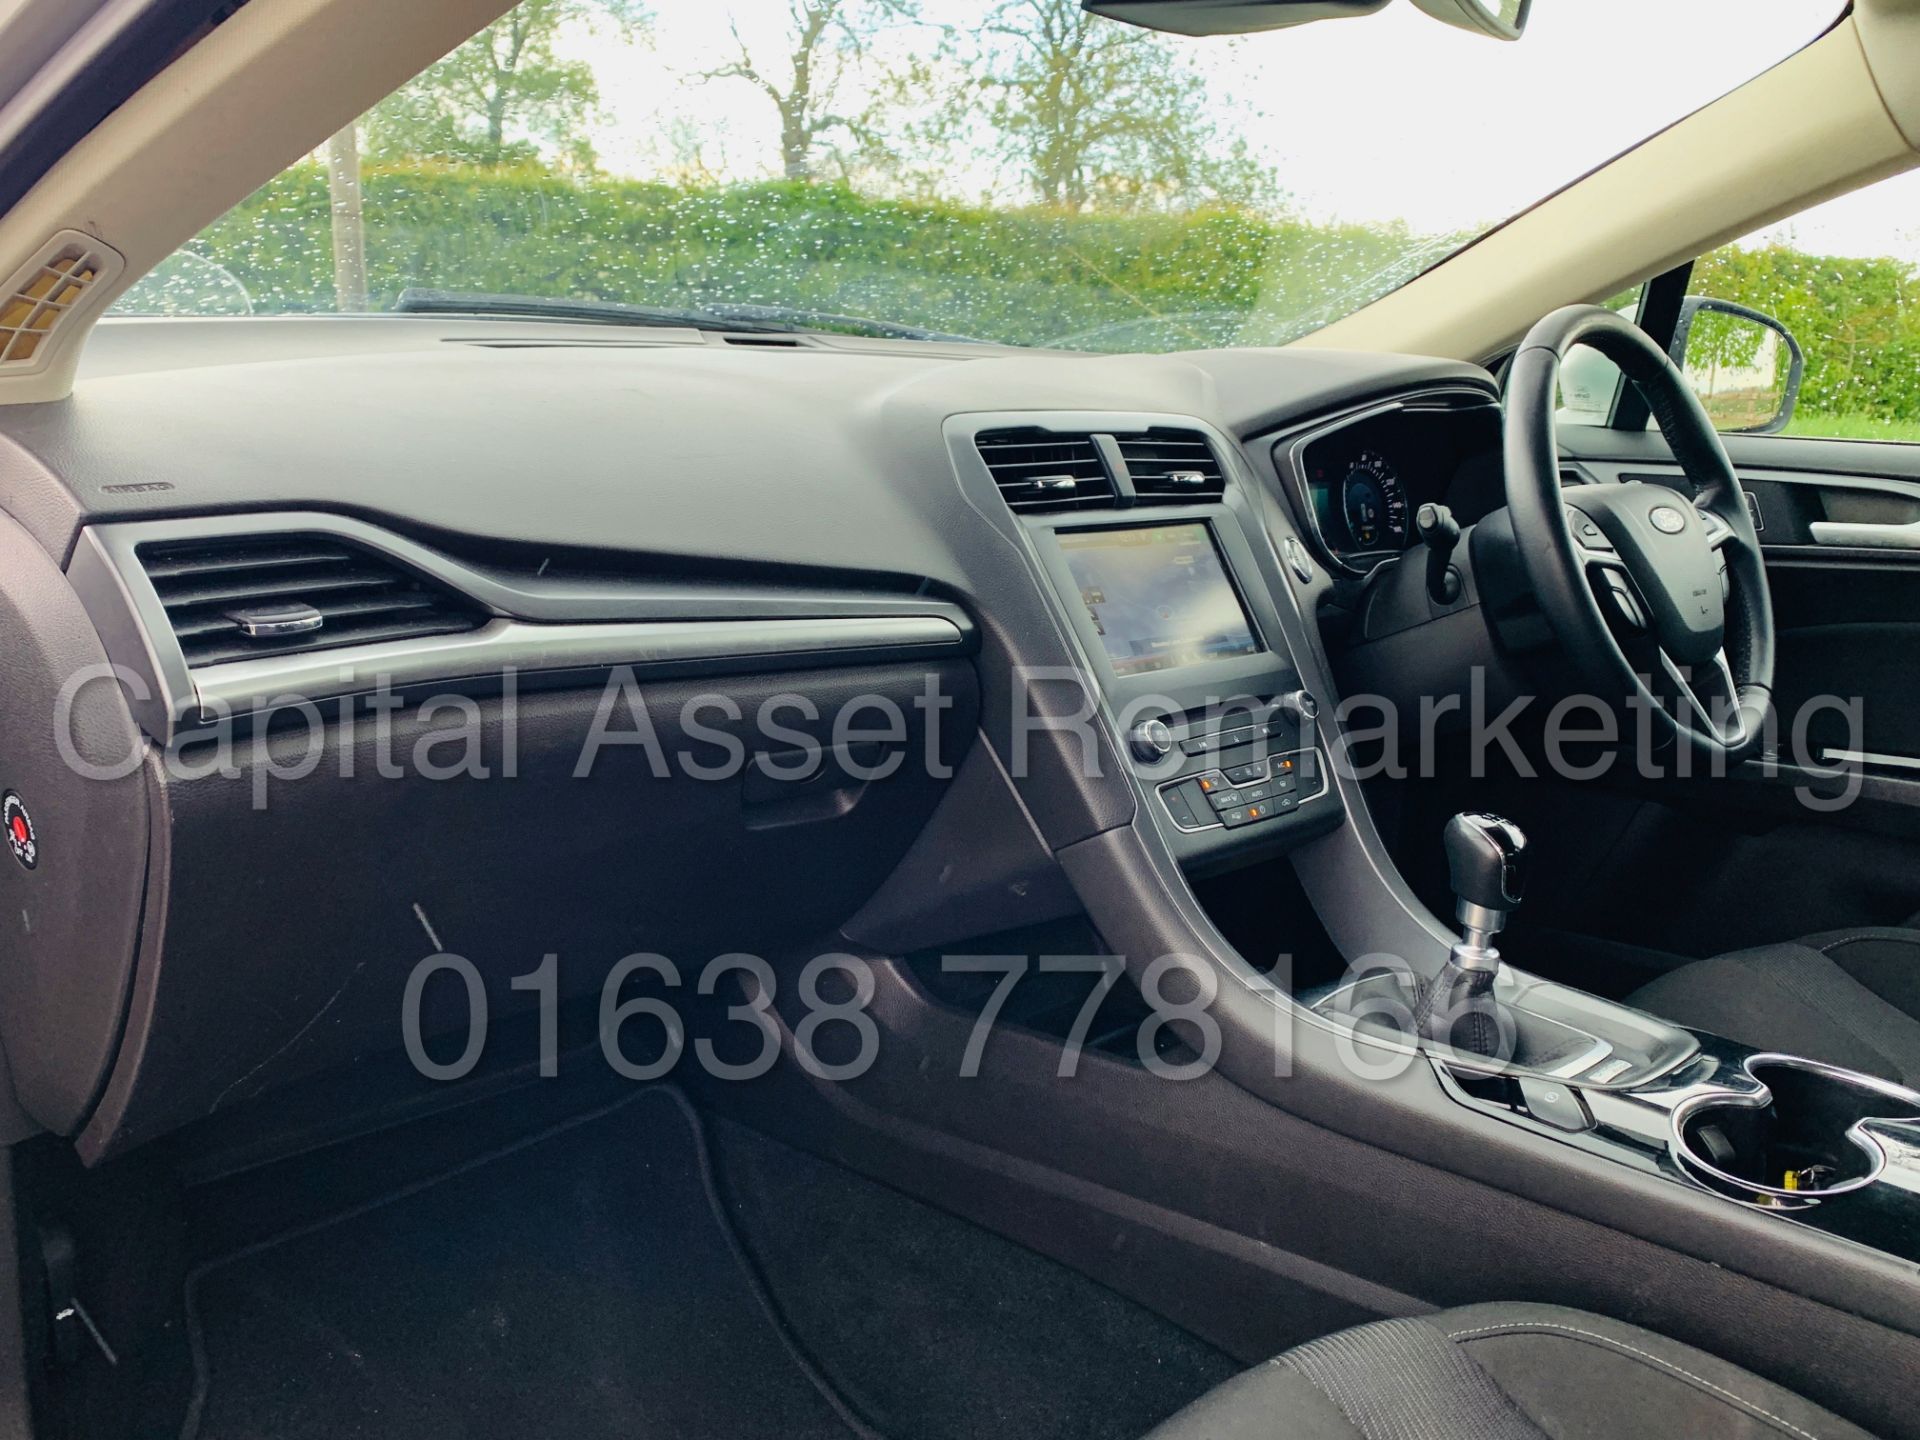 FORD MONDEO *TITANIUM* HATCHBACK (2016) '1.5 TDCI - EURO 6 - 6 SPEED' *1 OWNER - FULL HISTORY* - Image 20 of 46